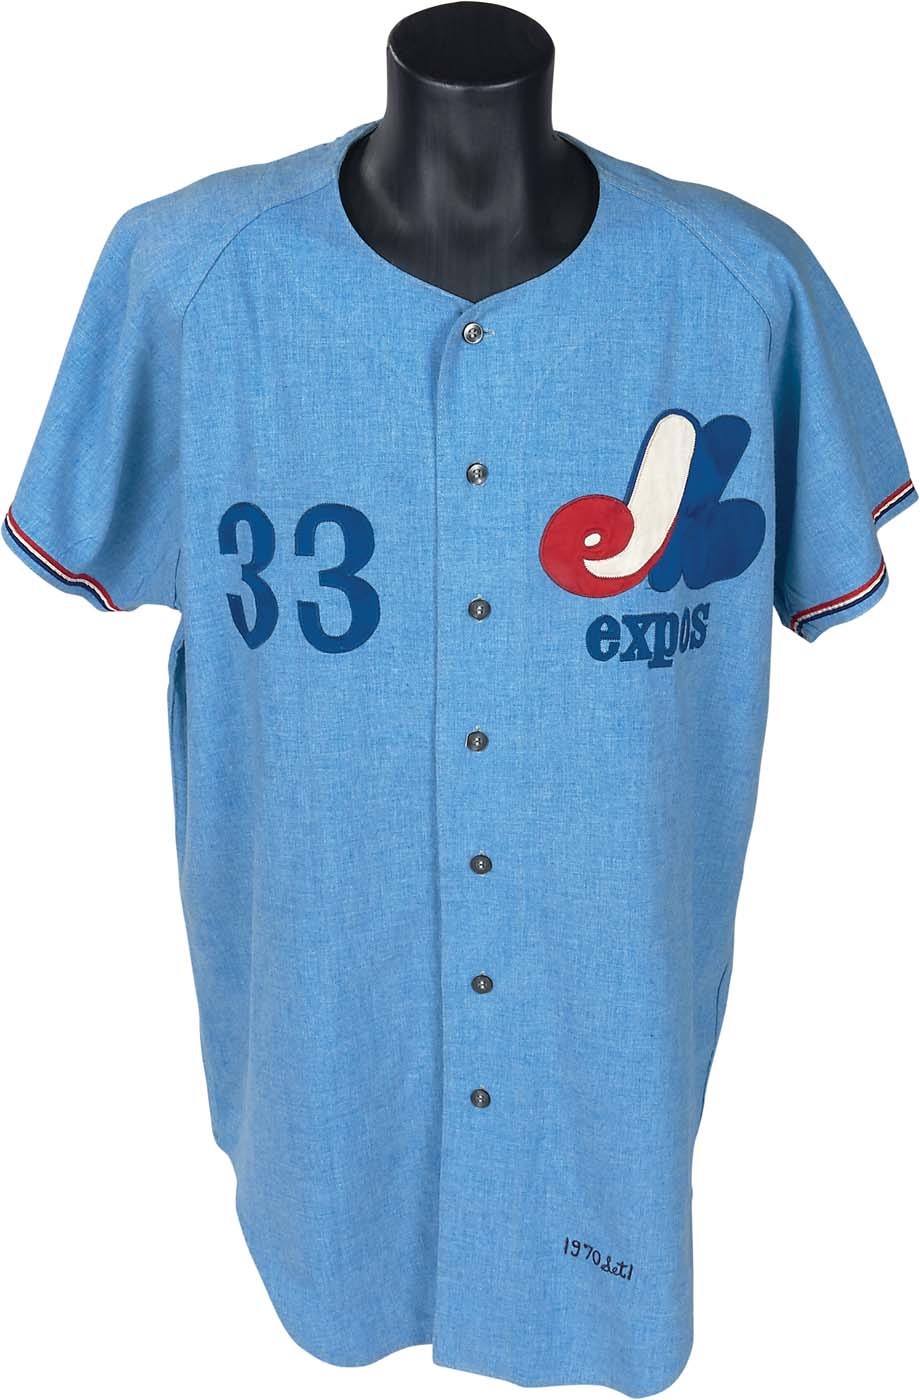 Baseball Equipment - 1970 Dick Williams Montreal Expos Jersey - Only Known Expos HOF Flannel